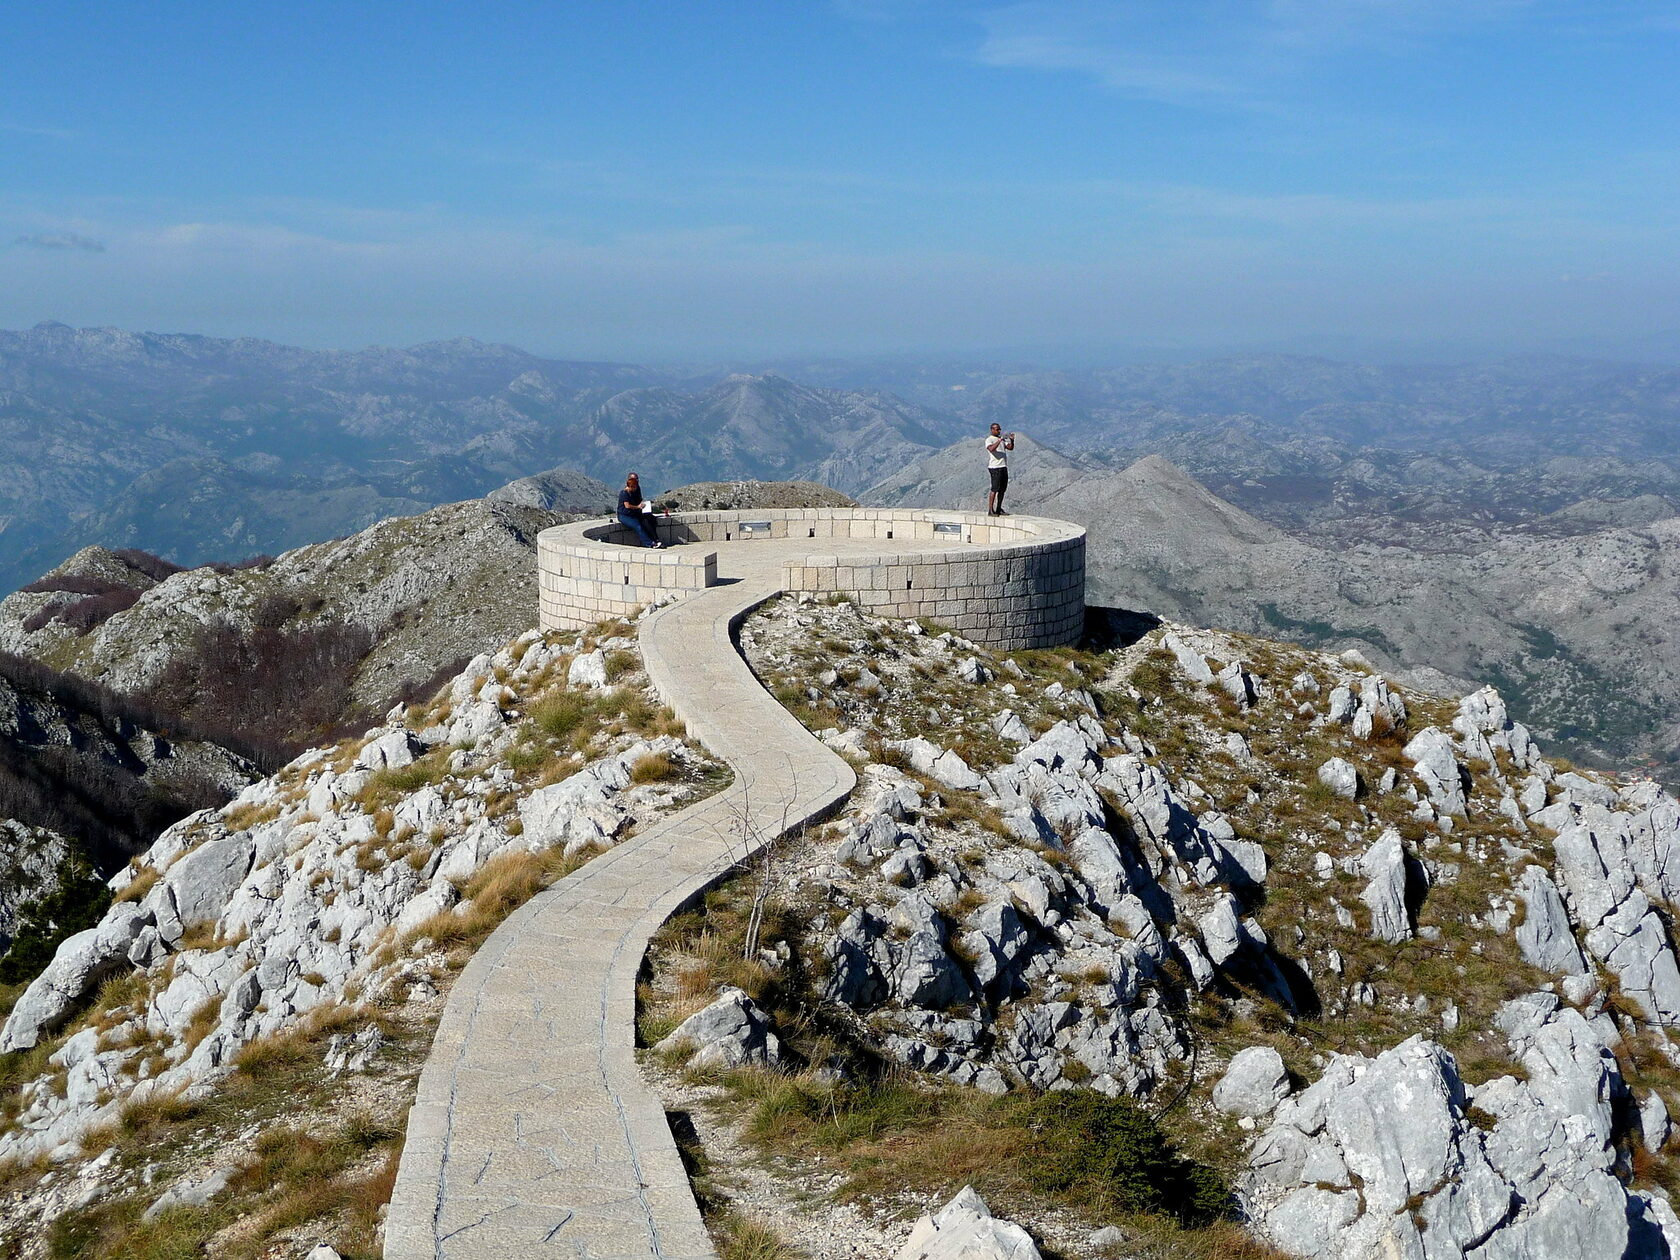 Travel-guide-to-the-njegoš-mausoleum-in-montenegro